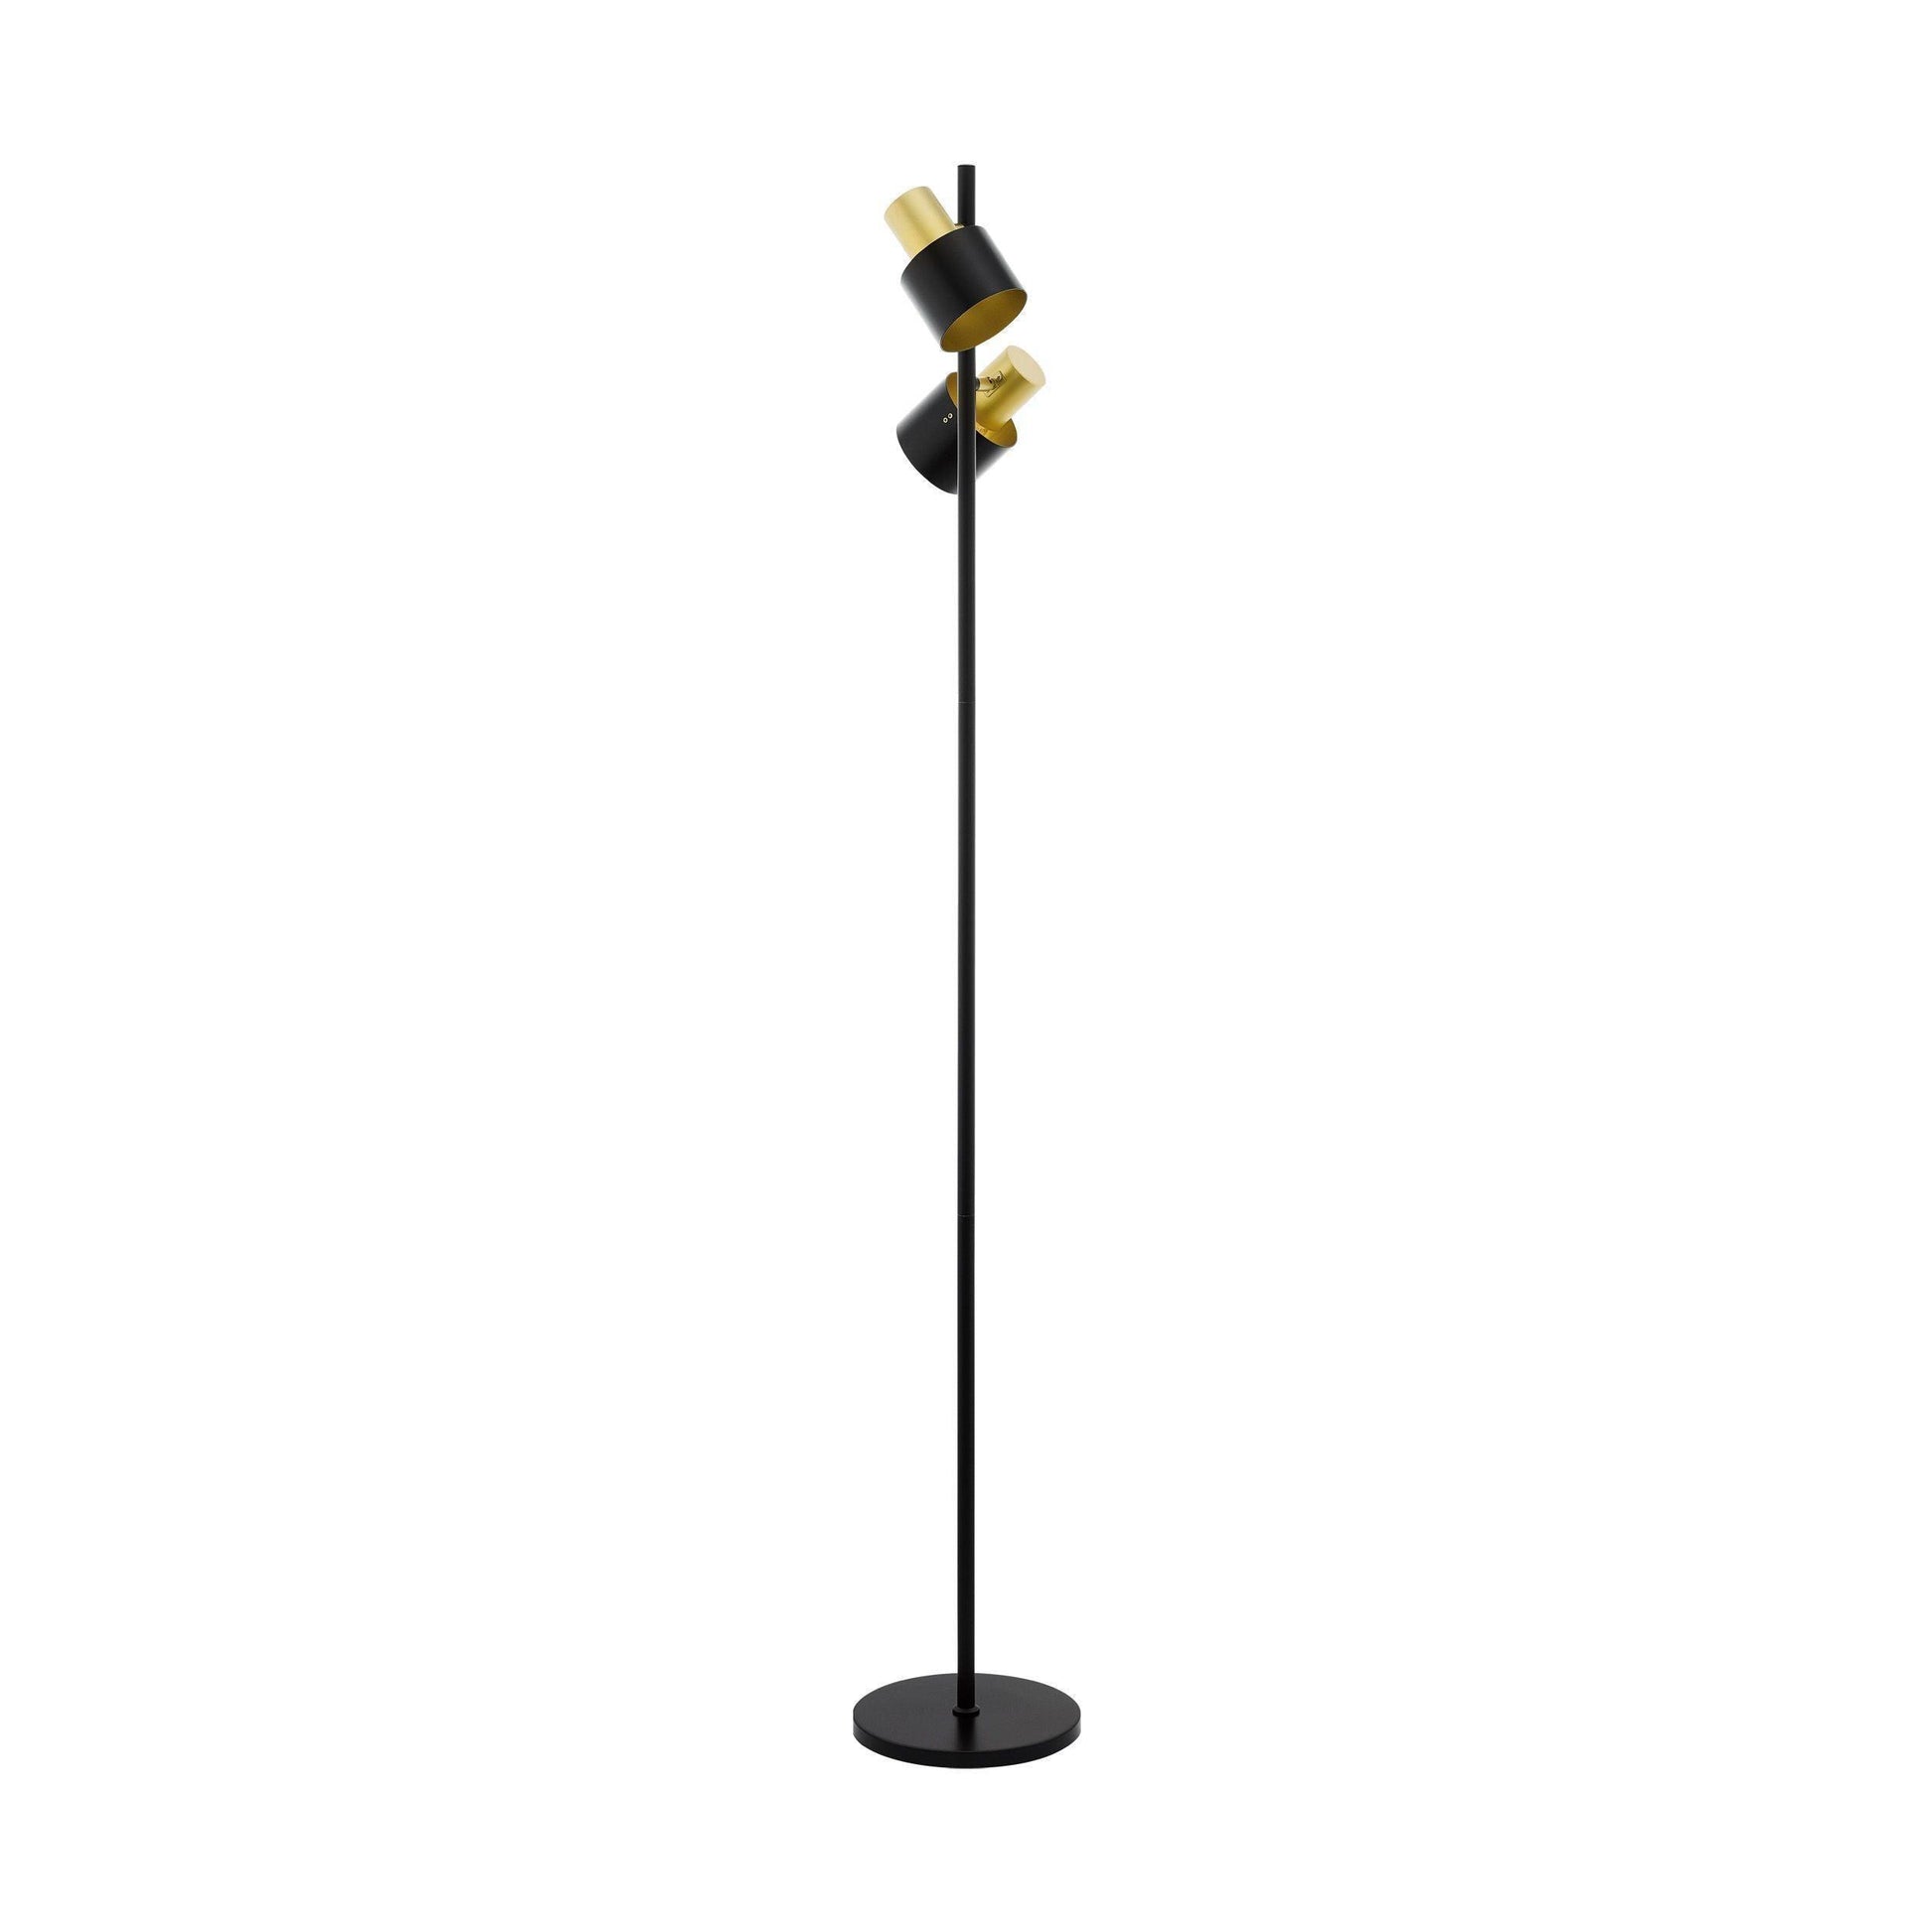 FIUMARA Floor Lamp by The Light Library